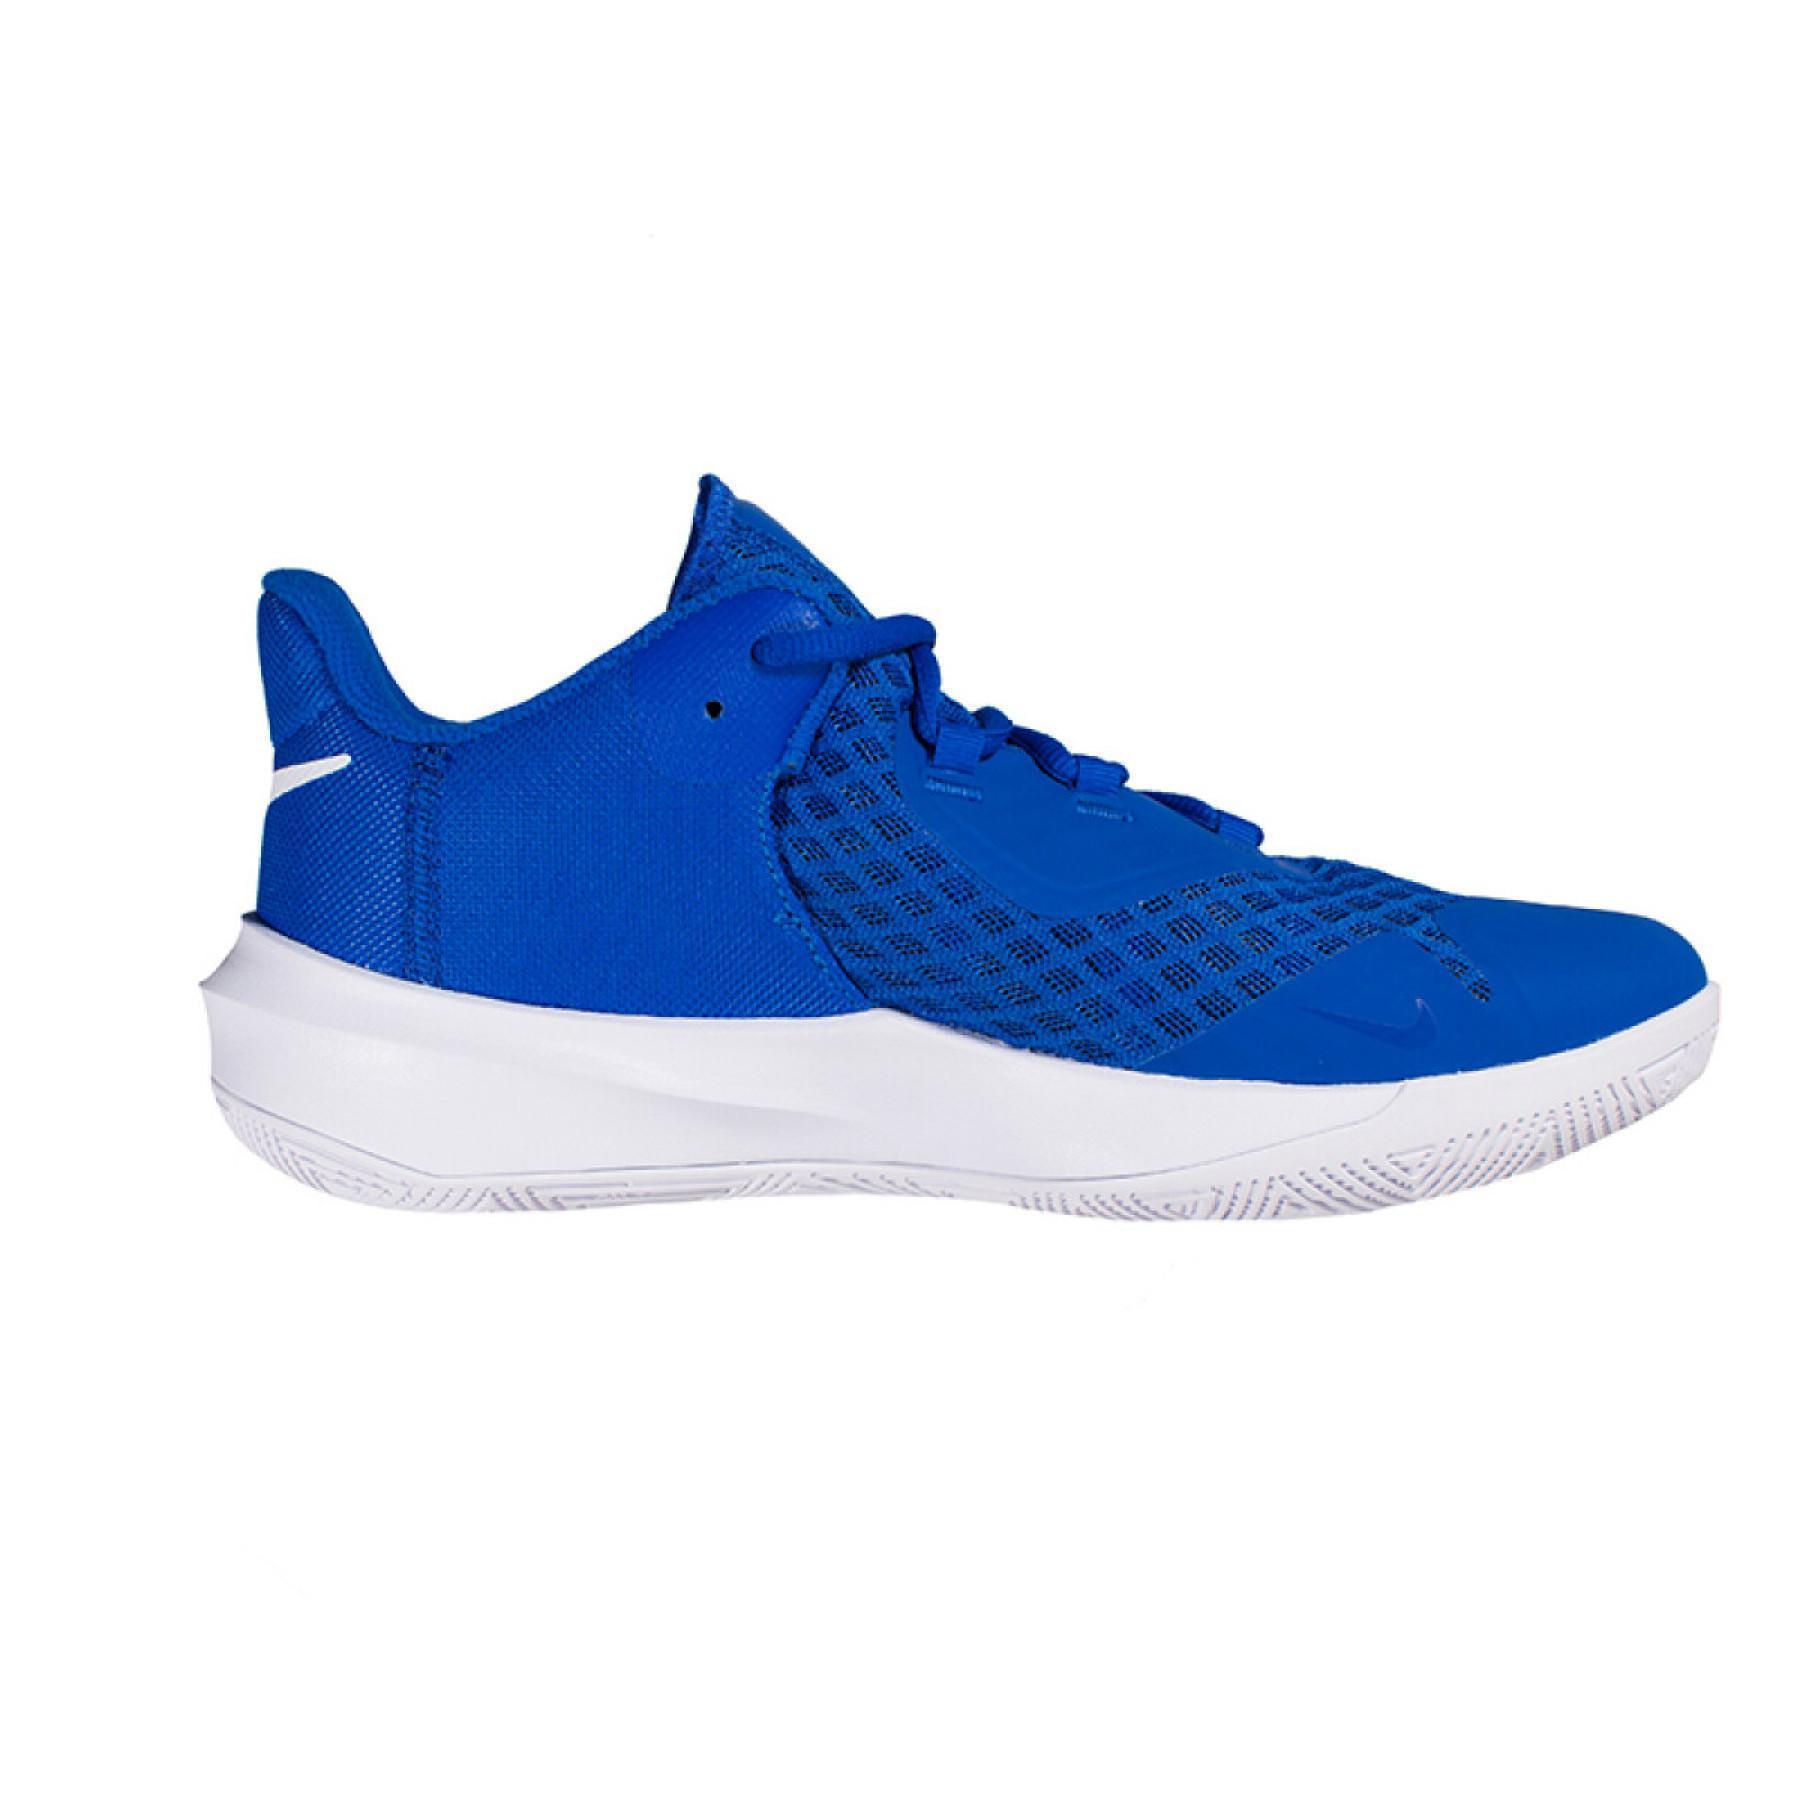 Shoes Nike Hyperspeed Court - Hyperspeed Court - Nike - Shoes